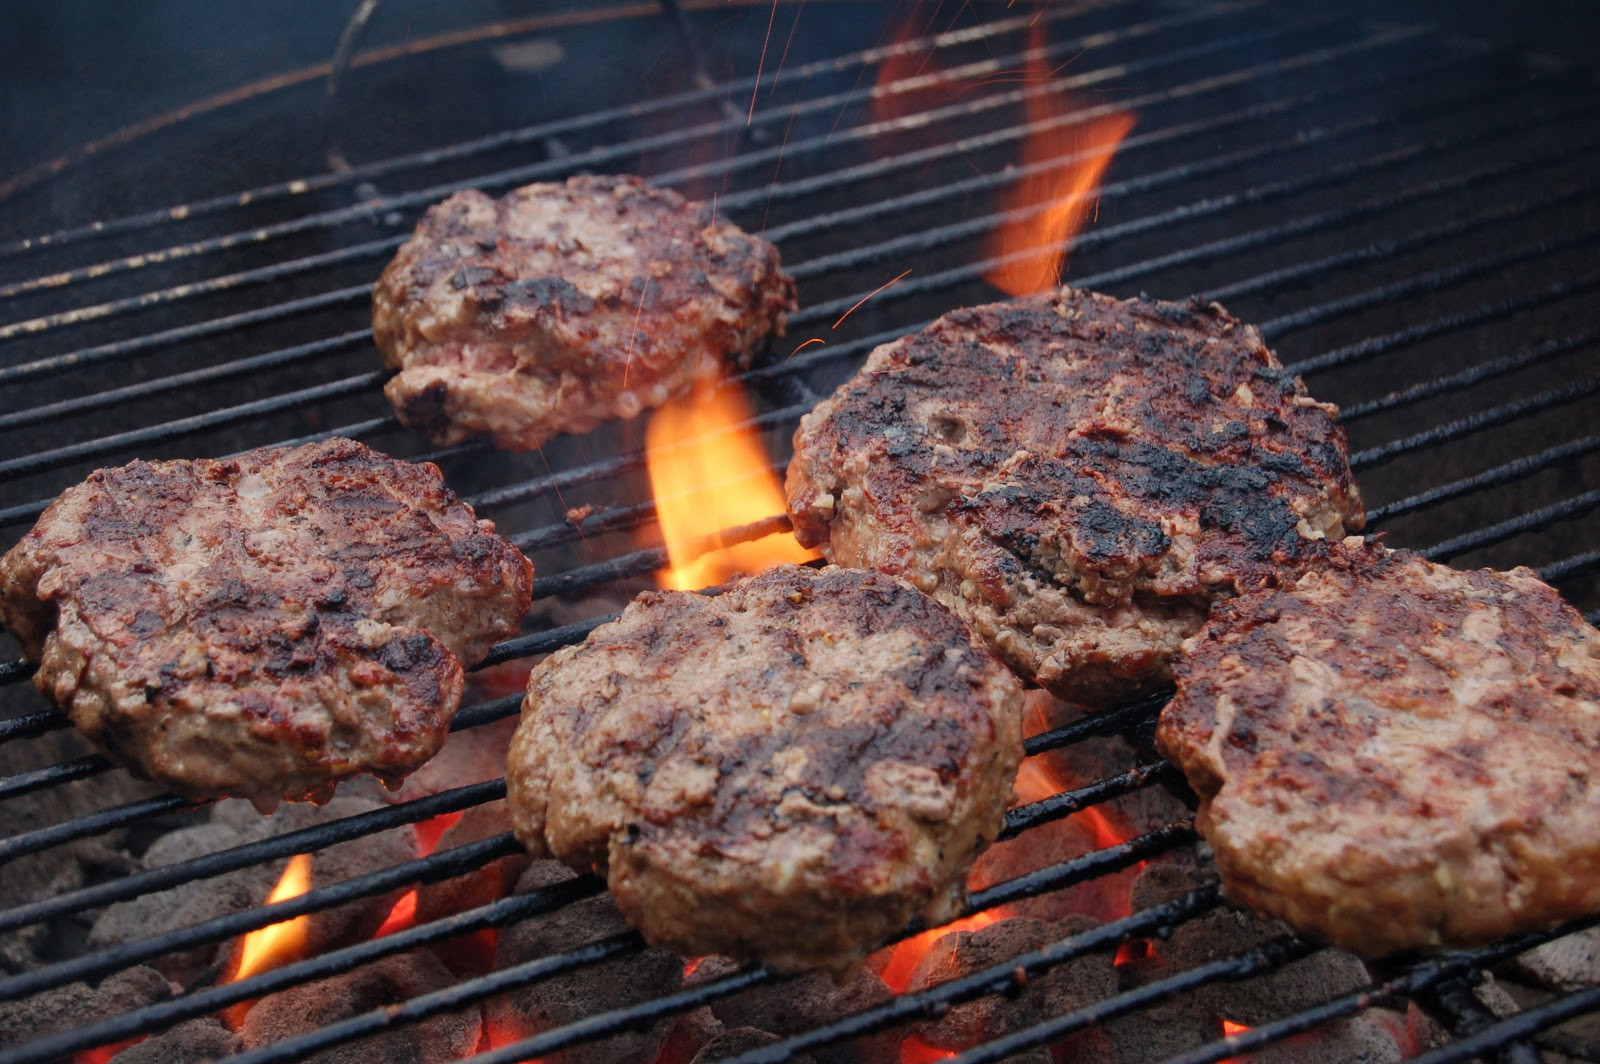 Charcoal Grill Hamburgers Luxury Kettler Cuisine Grilling the Perfect Burgers